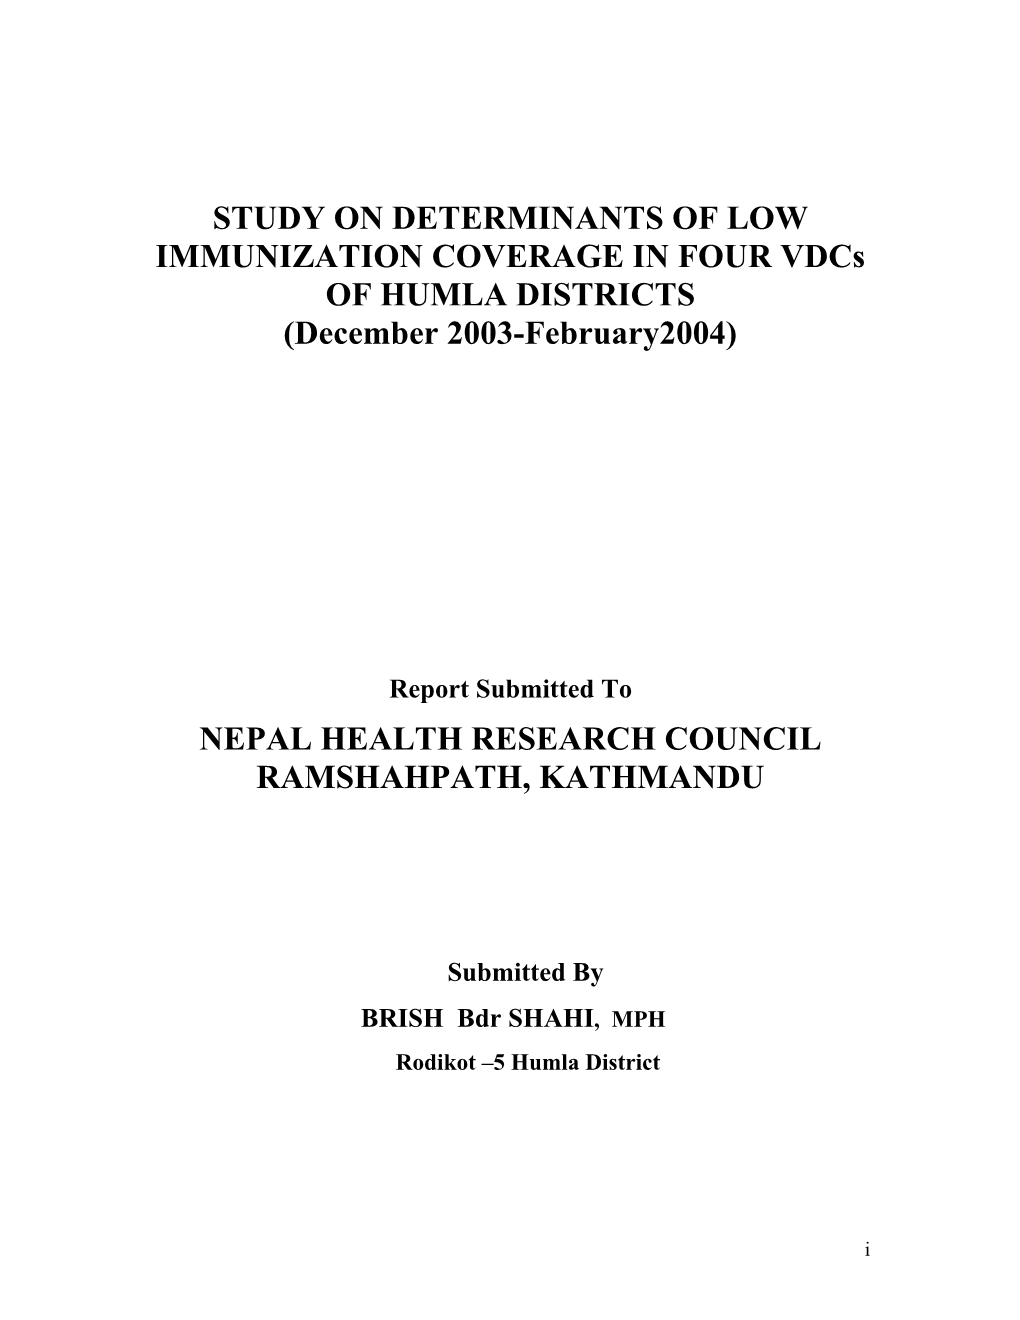 STUDY on DETERMINANTS of LOW IMMUNIZATION COVERAGE in FOUR Vdcs of HUMLA DISTRICTS (December 2003-February2004)